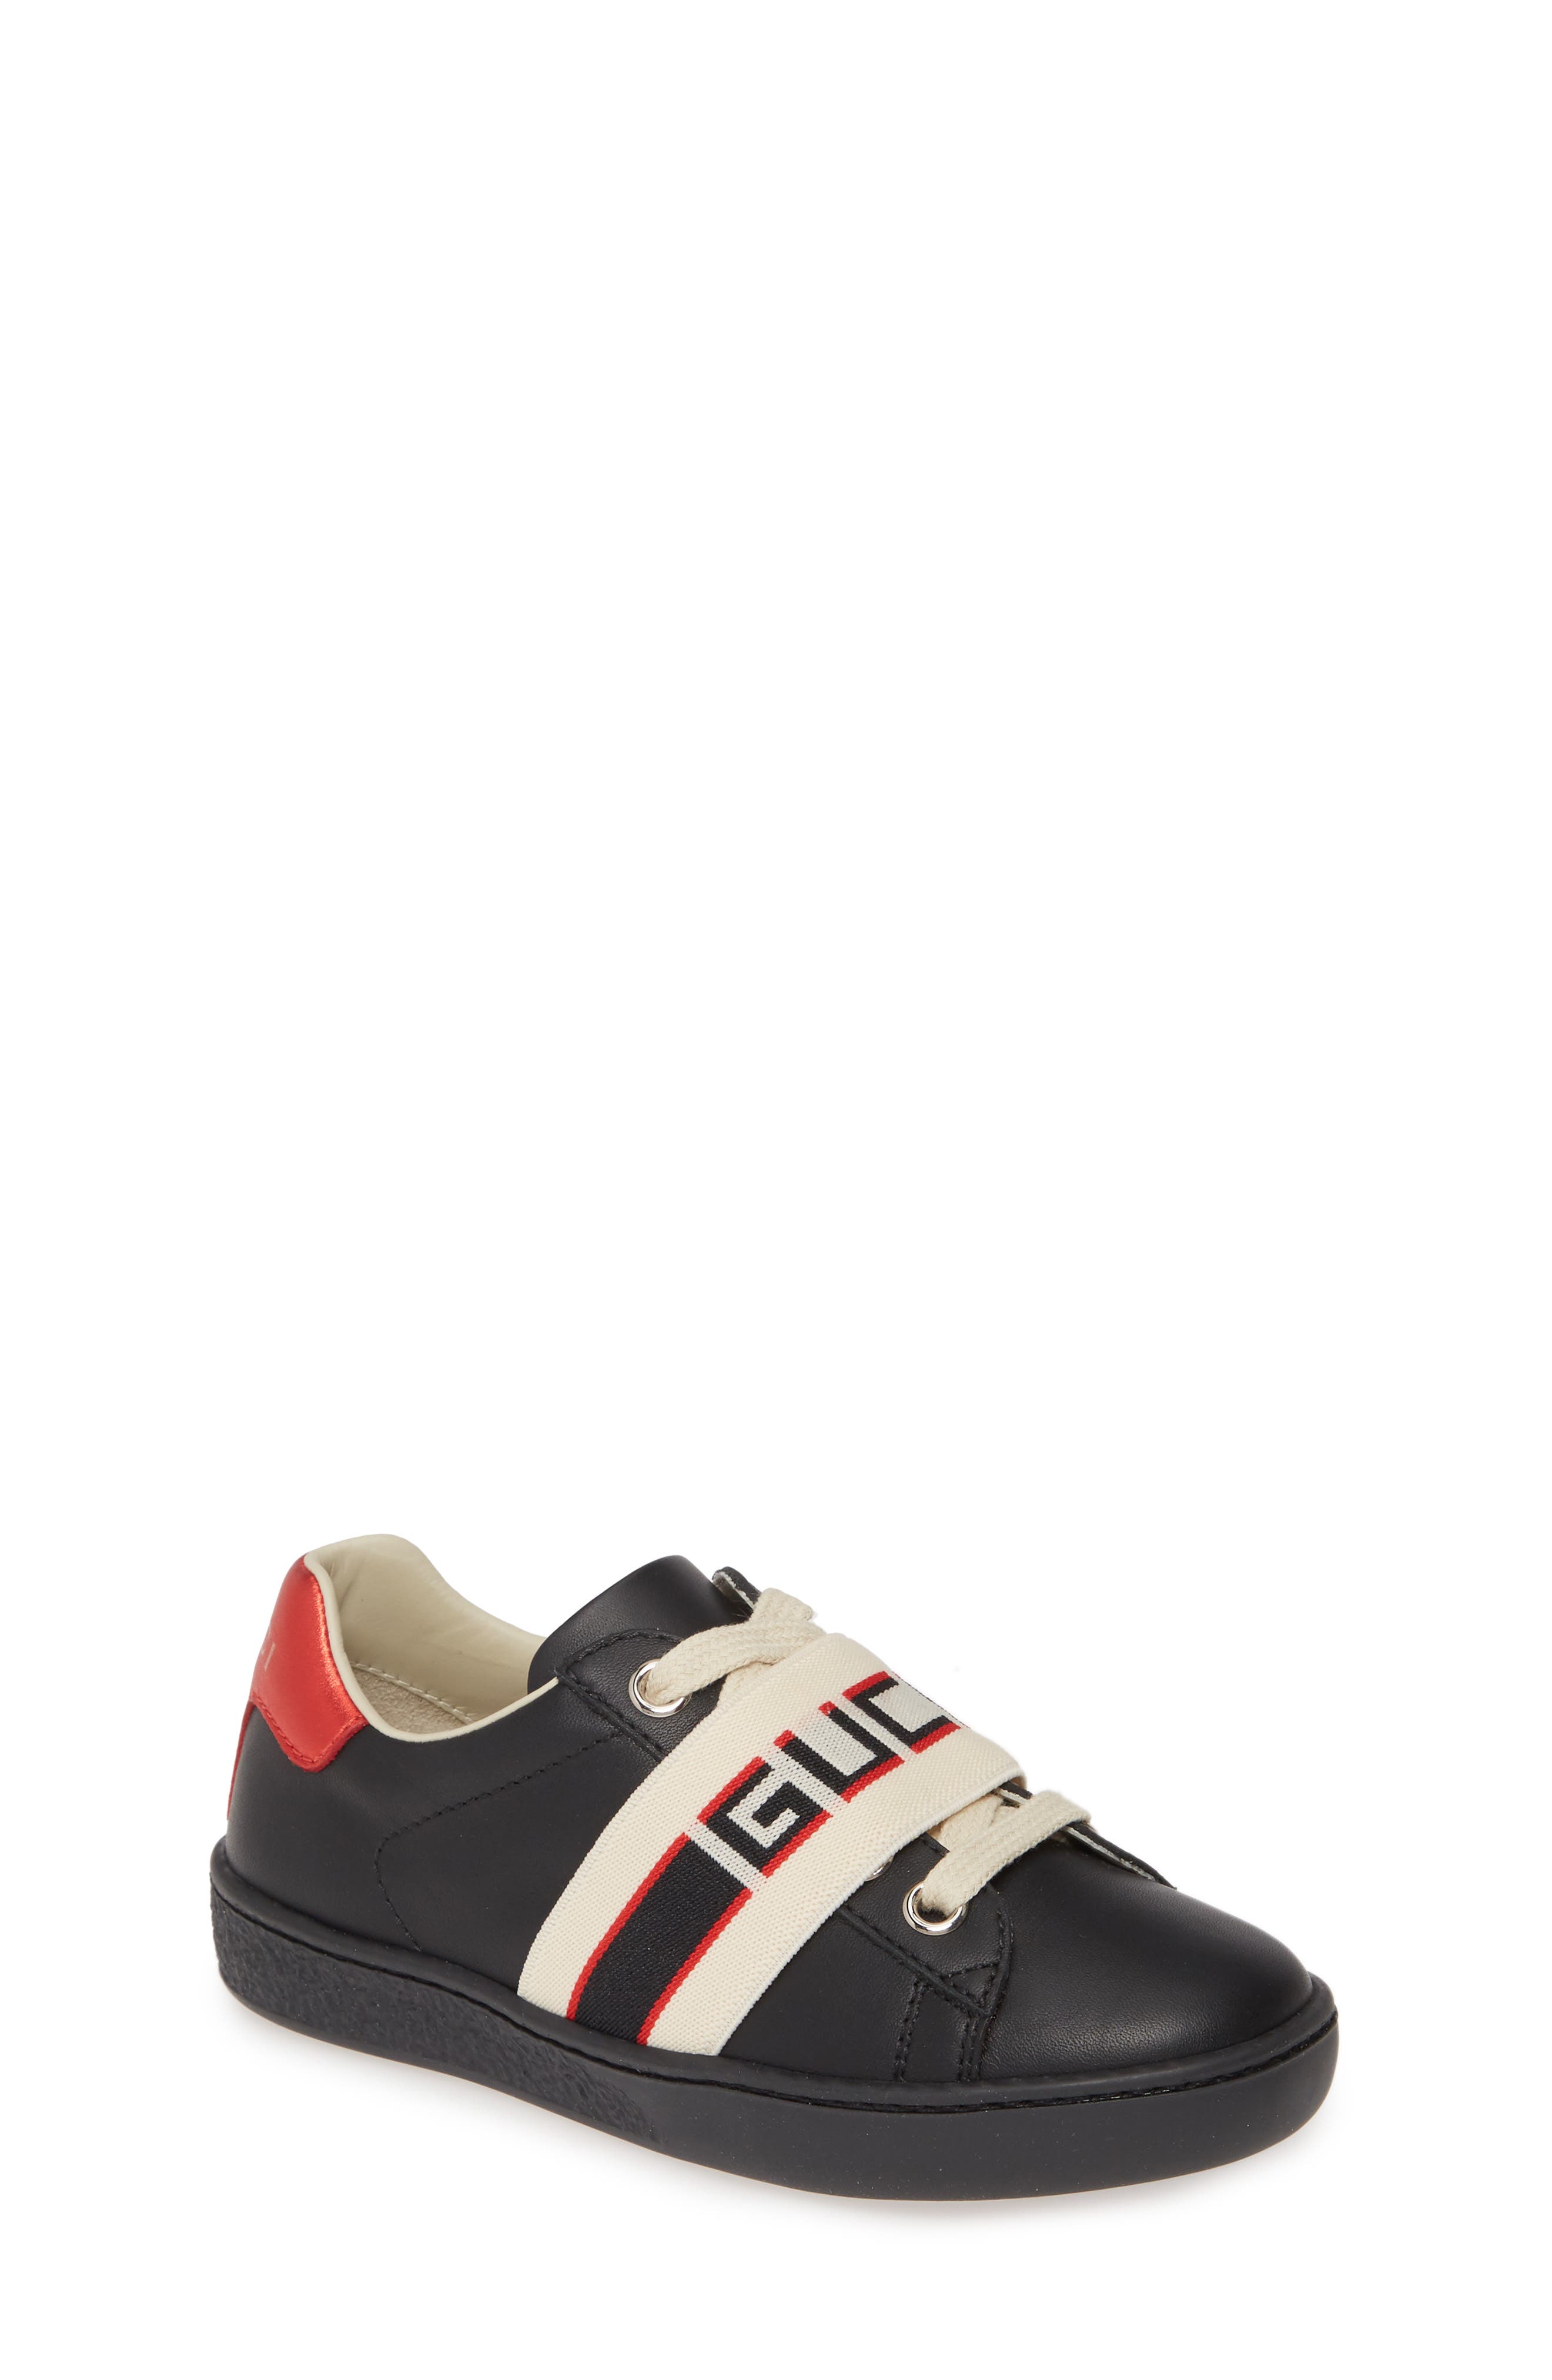 Gucci Toddler Shoe Size Chart